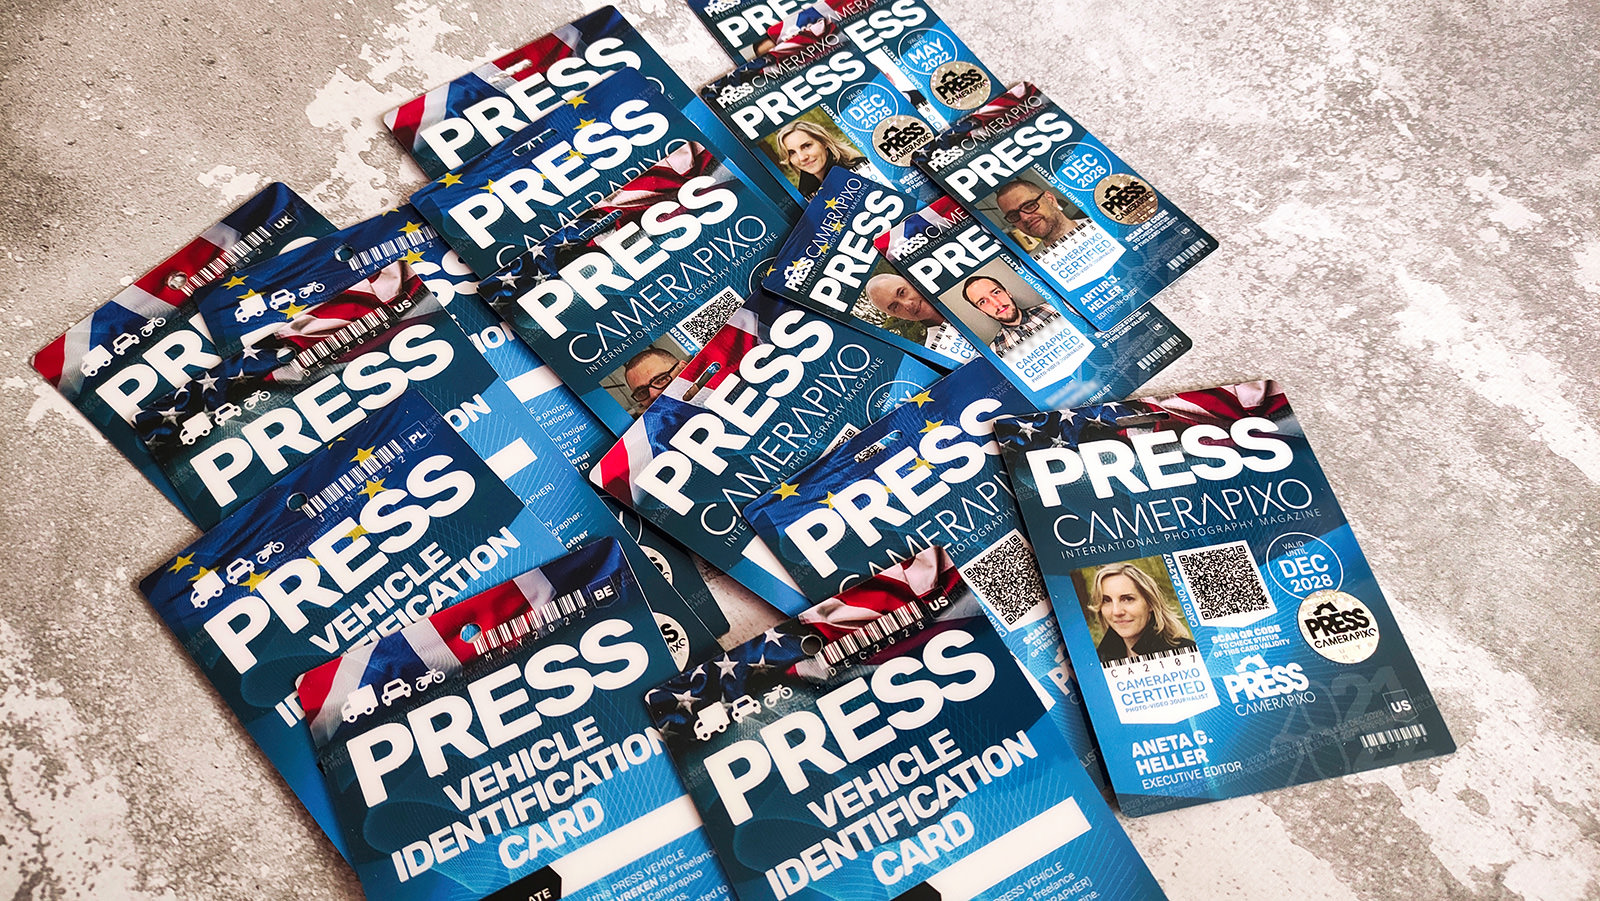 Photography magazine support for Press ID Card and freelancer